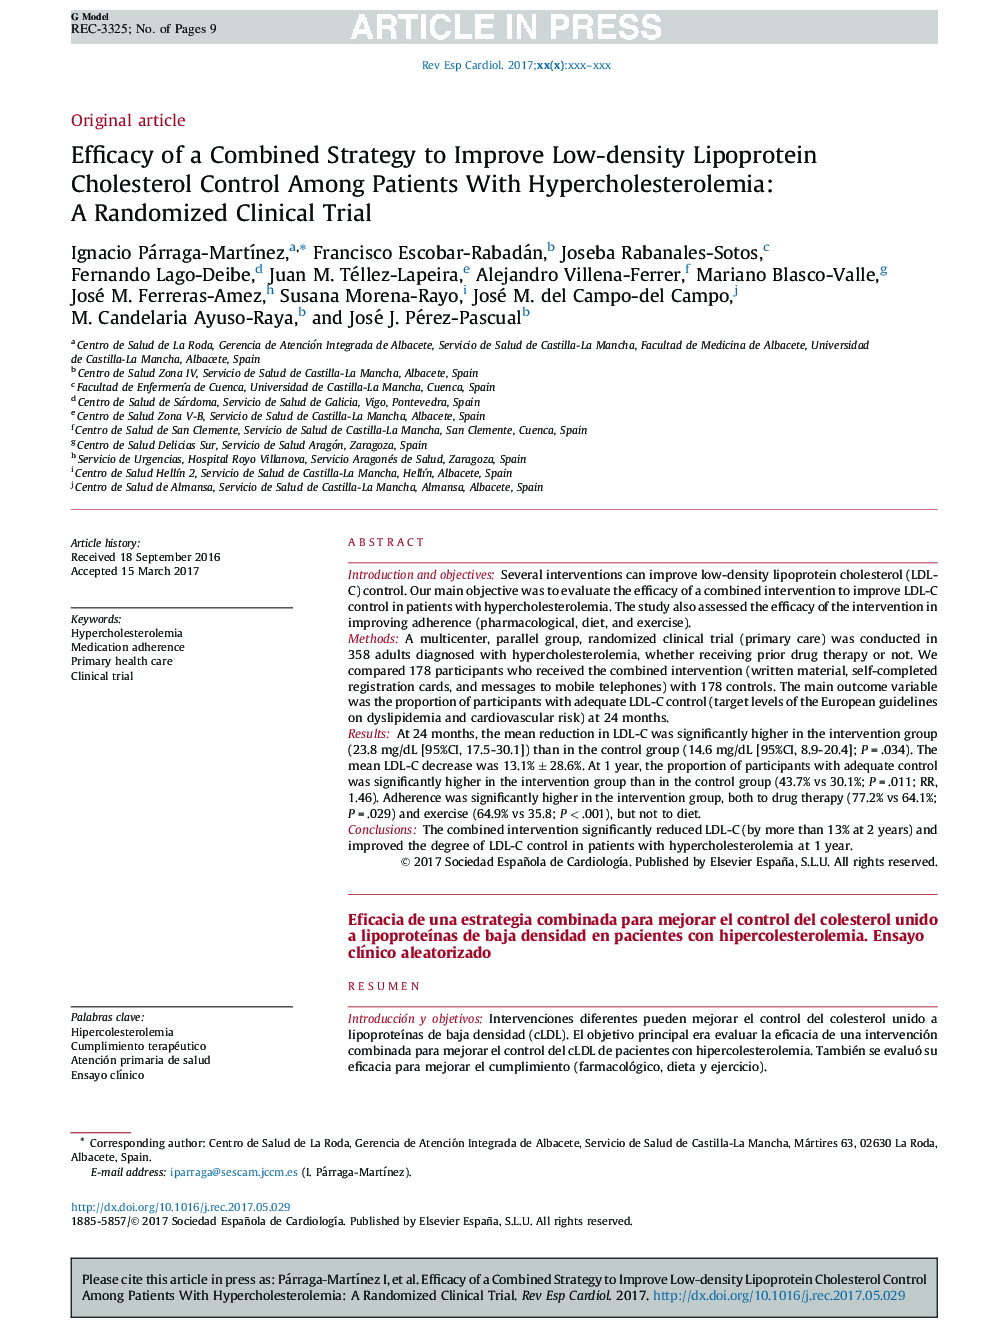 Efficacy of a Combined Strategy to Improve Low-density Lipoprotein Cholesterol Control Among Patients With Hypercholesterolemia: A Randomized Clinical Trial